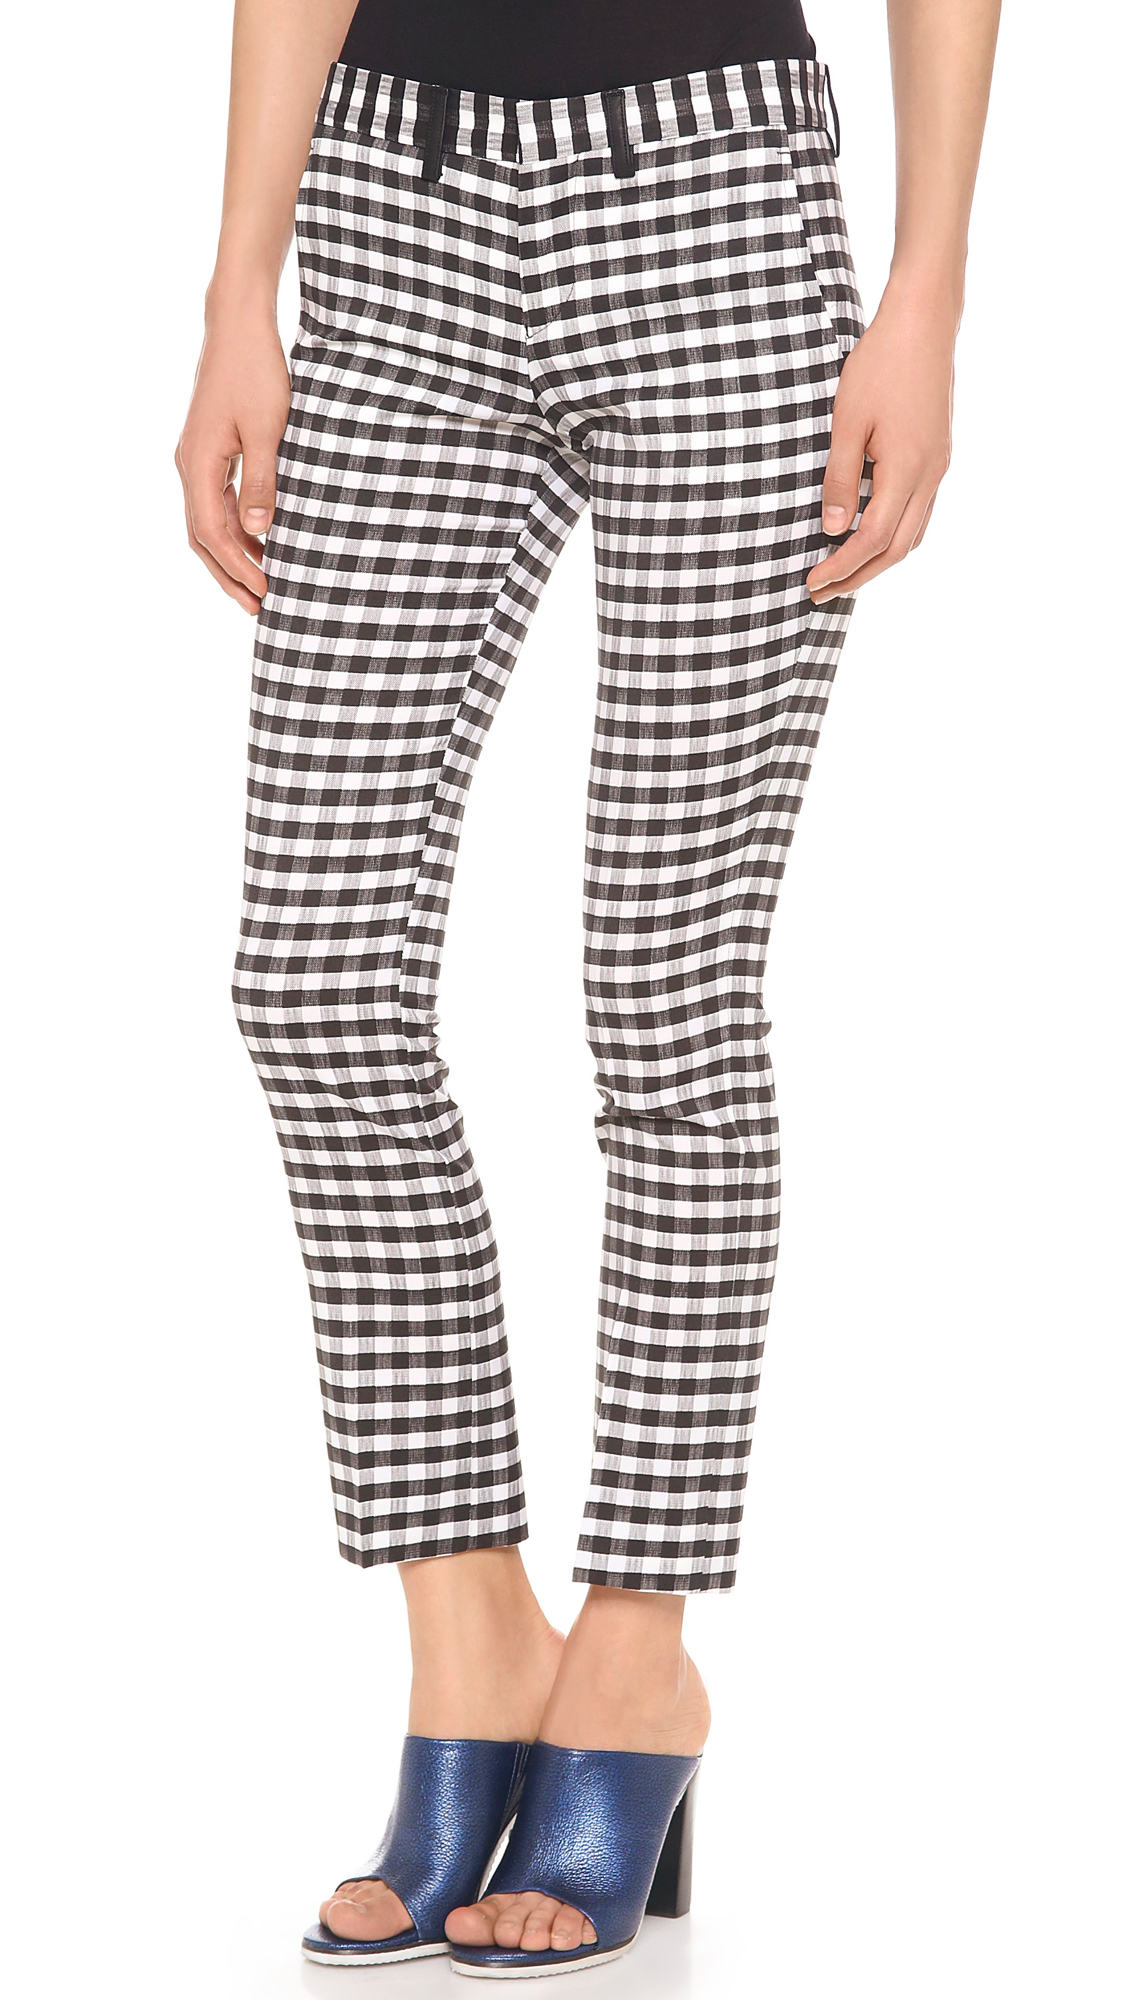 Lyst - Each X Other Gingham Pants in Black